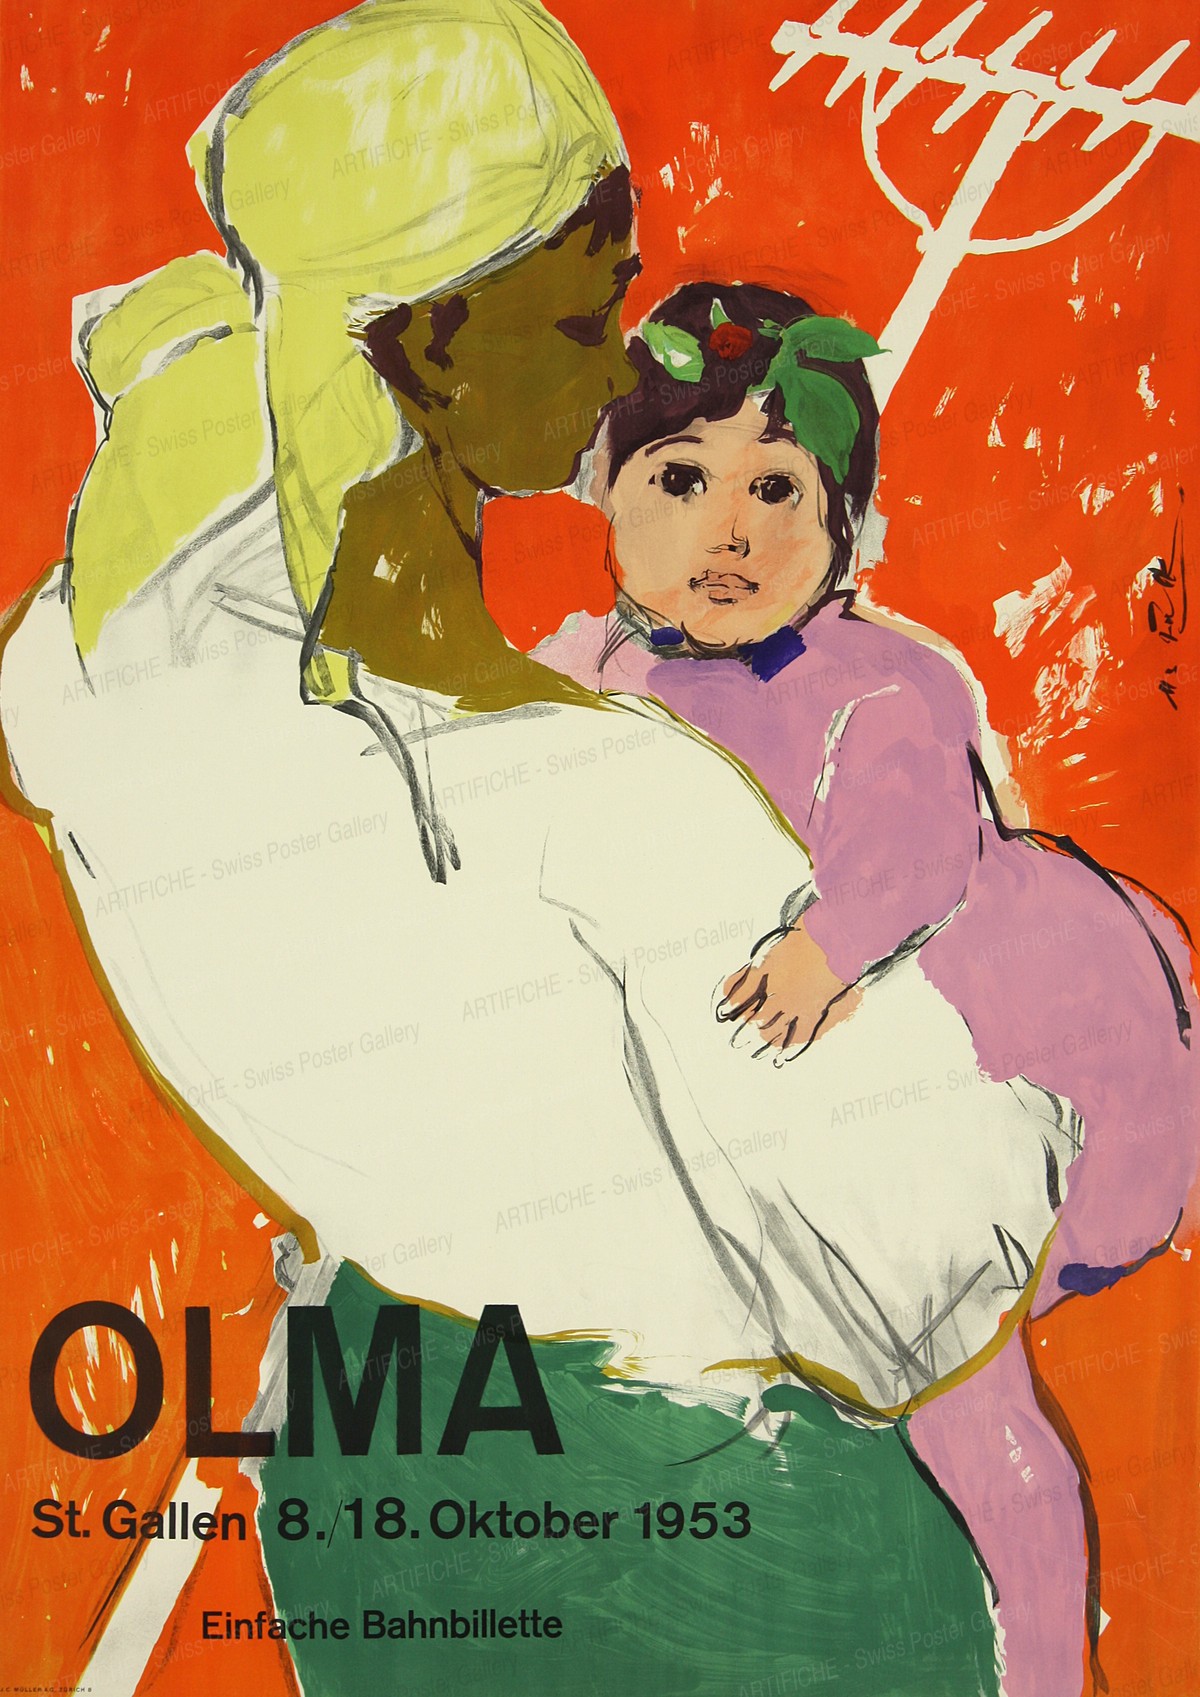 Olma St. Gall – Swiss Fair for Agriculture and Nutrition, Hans Falk